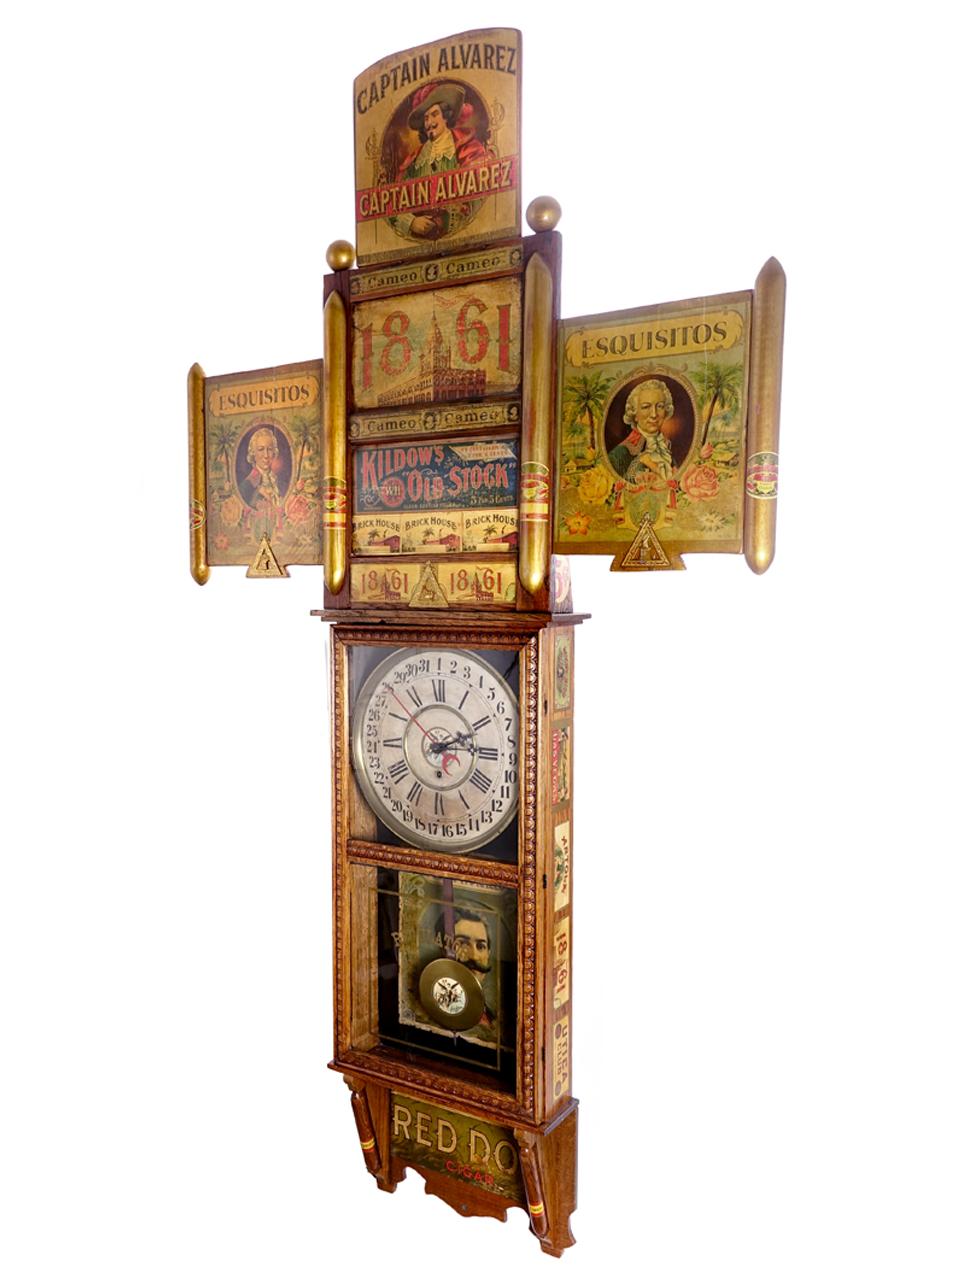 The center of this amazing advertising display is a 1920 Gilbert Observatory 8 day 1/2 hour strike clock. It's make an impressive display that is almost 6 foot tall. This clock was created between 1920 and 1930. It has been preserved back to as